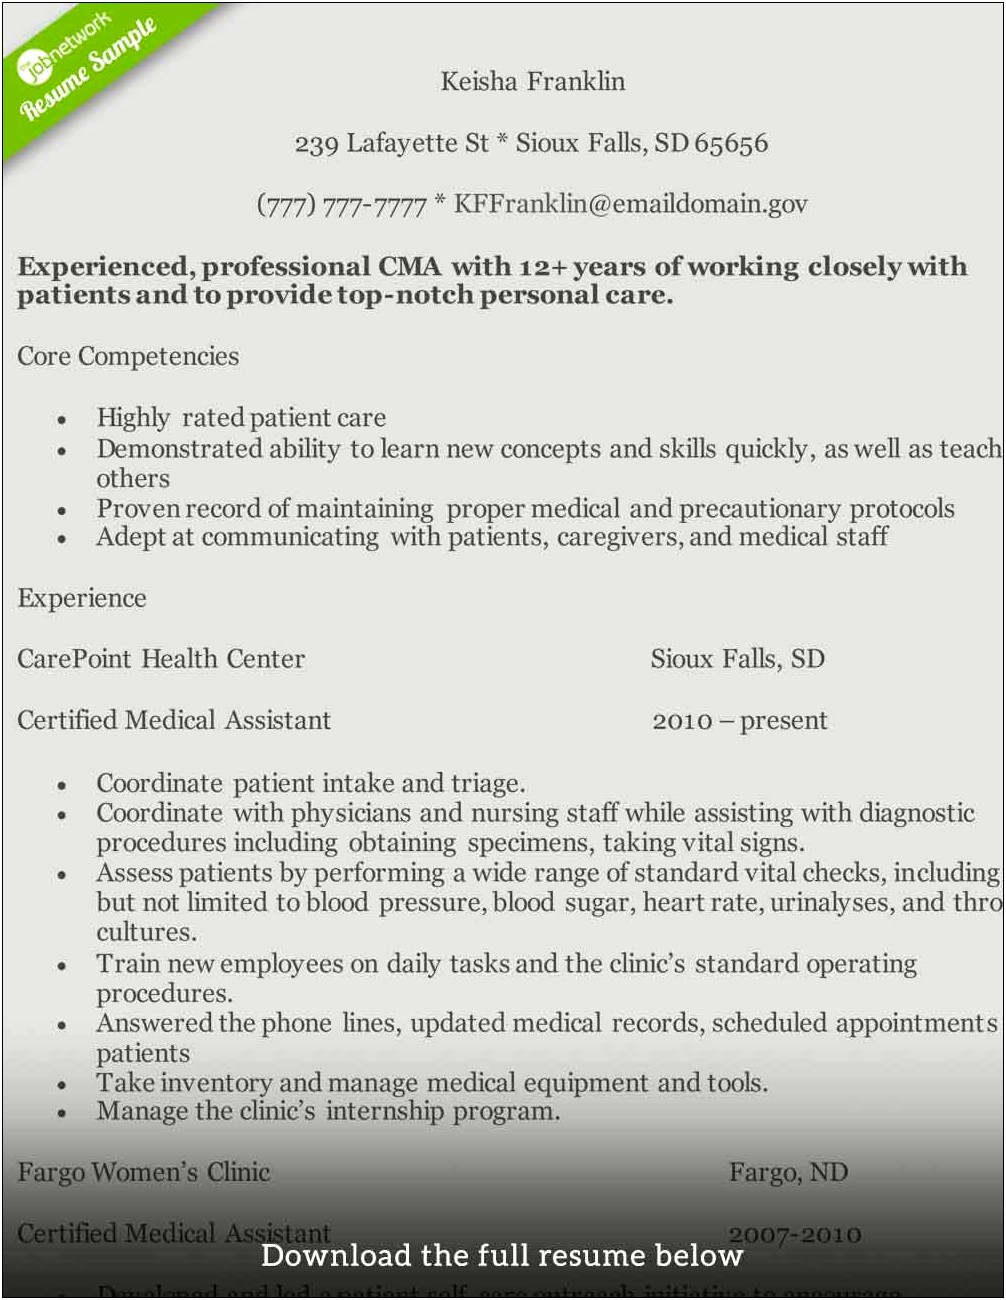 Professional Summary For Resume For Medical Assistant